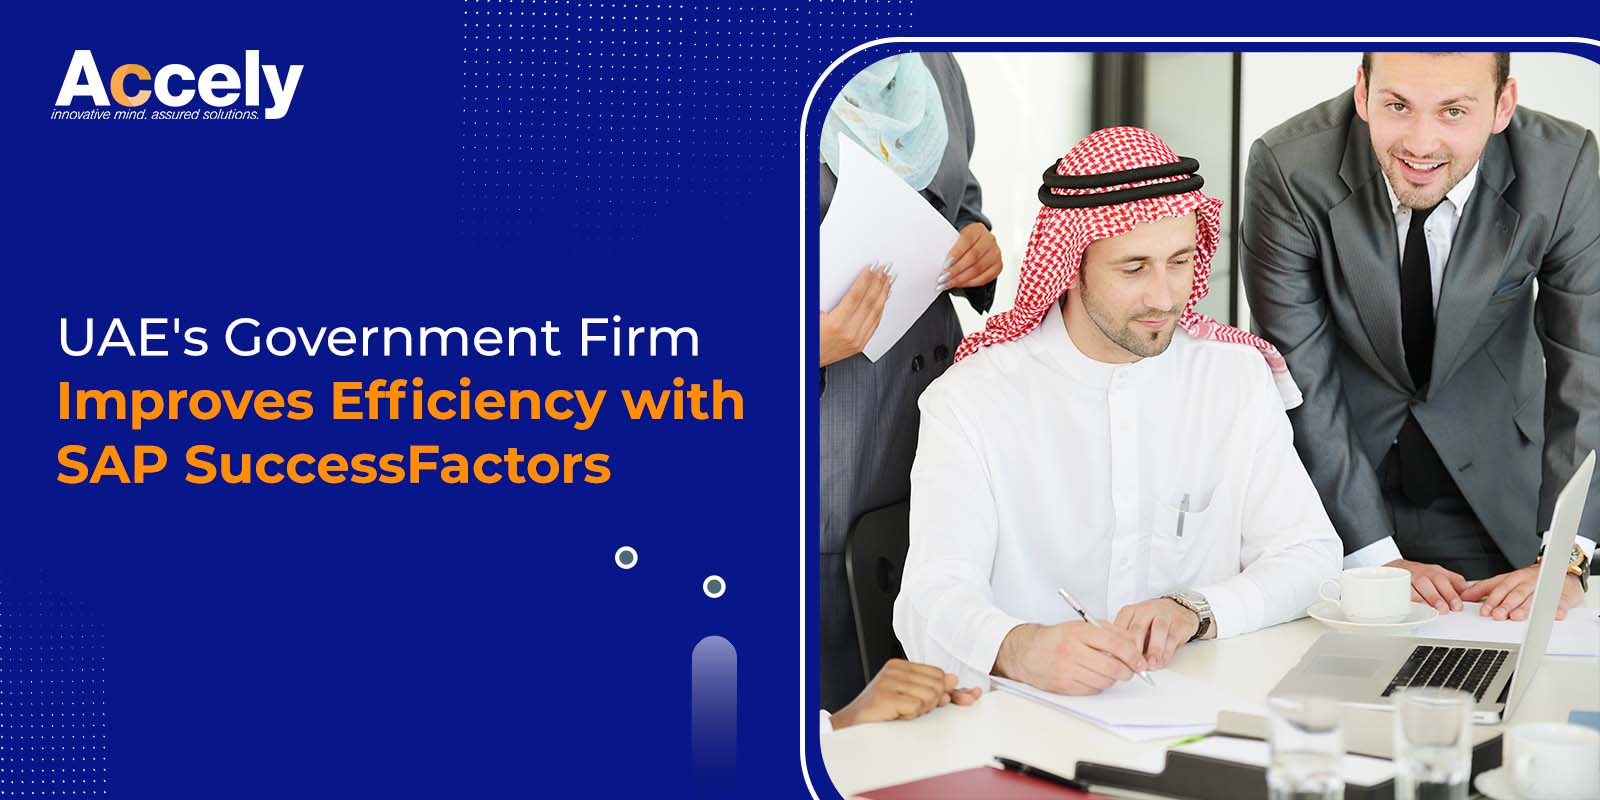 UAE's Government Firm Improves Efficiency with SAP SuccessFactors